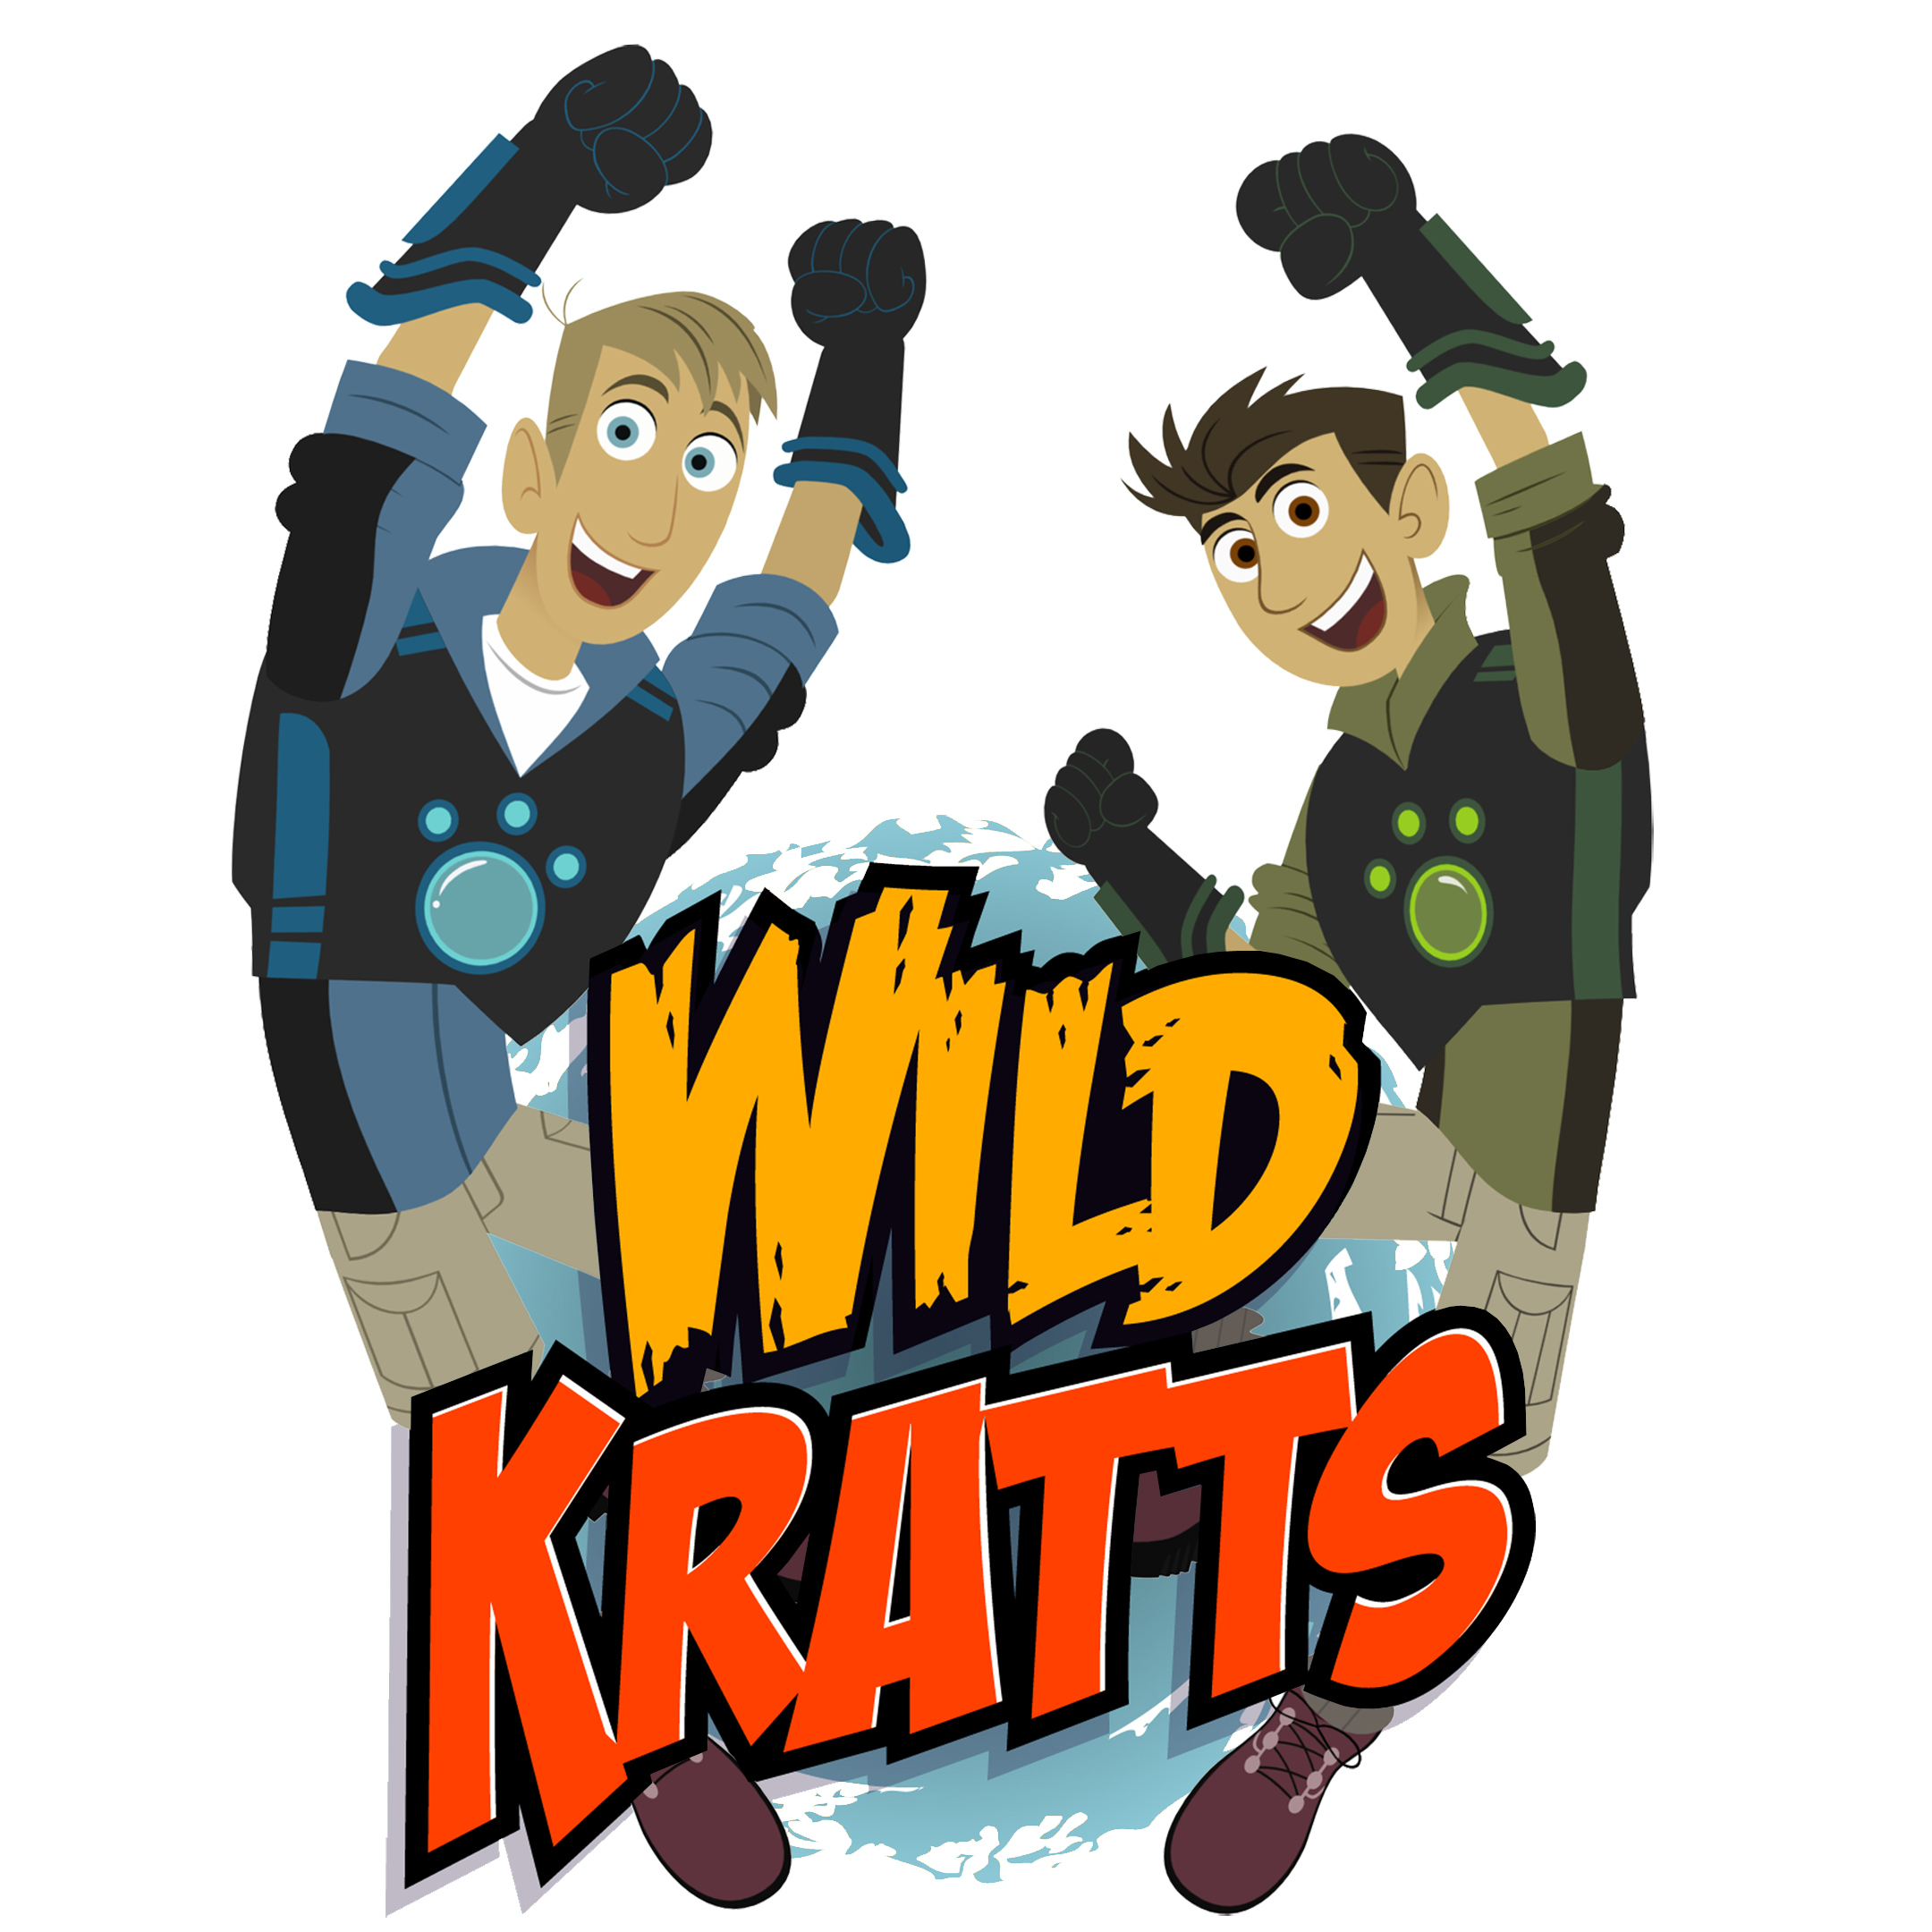 “Wild Kratts Live!” at The Beacon Theatre